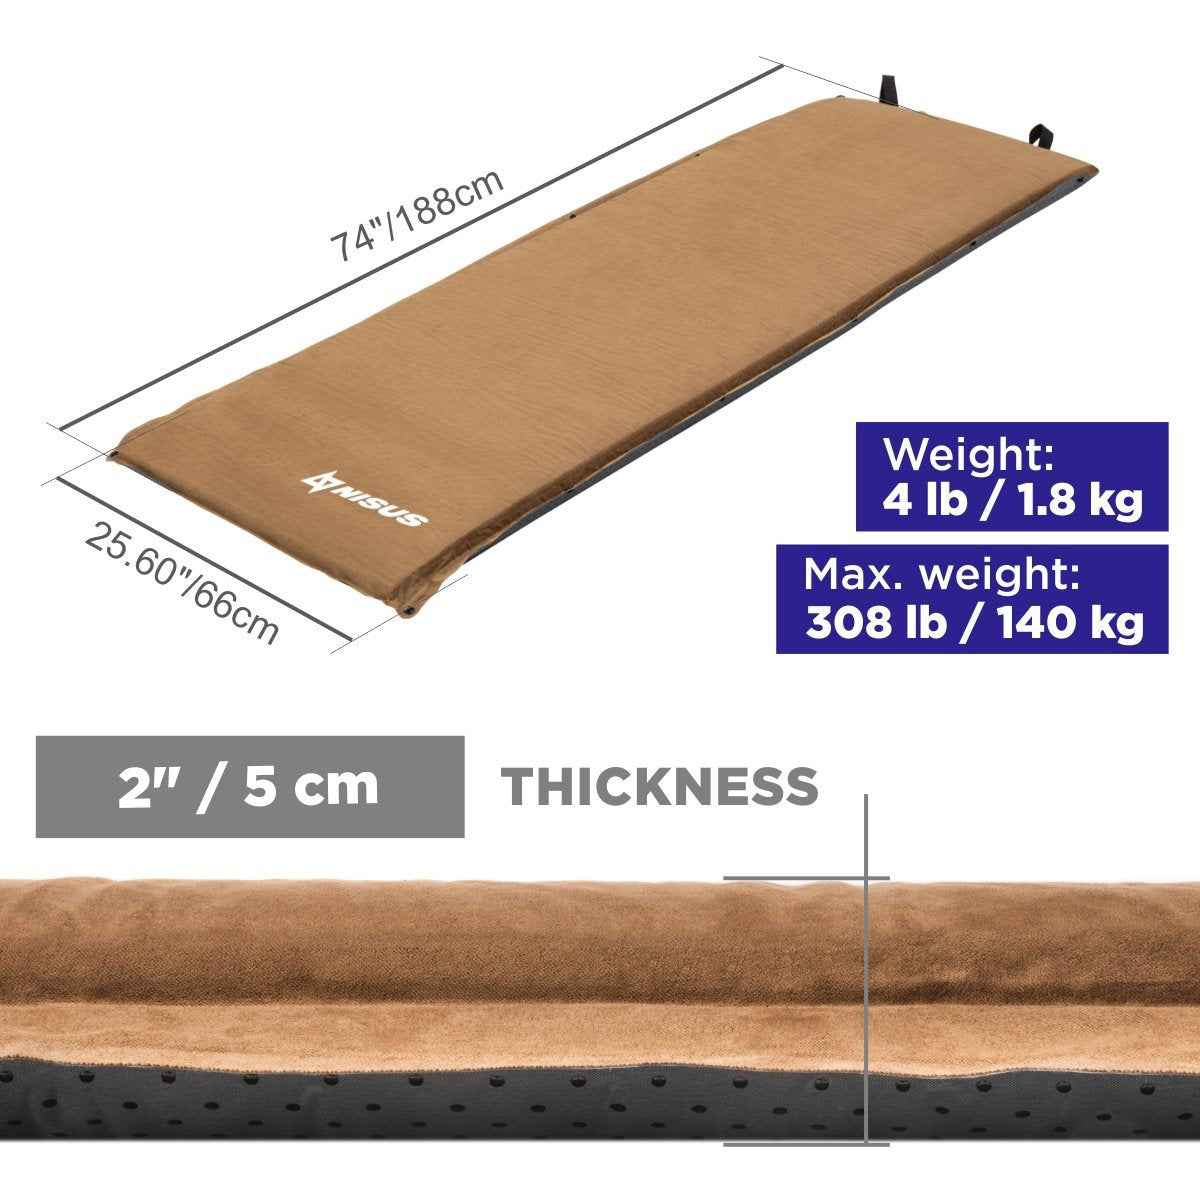 2-inch Lightweight Self Inflating Camping Sleeping Pad weighs 4 lbs, carries up to 308 lbs. It is 74 inches long and 25.6 inches wide